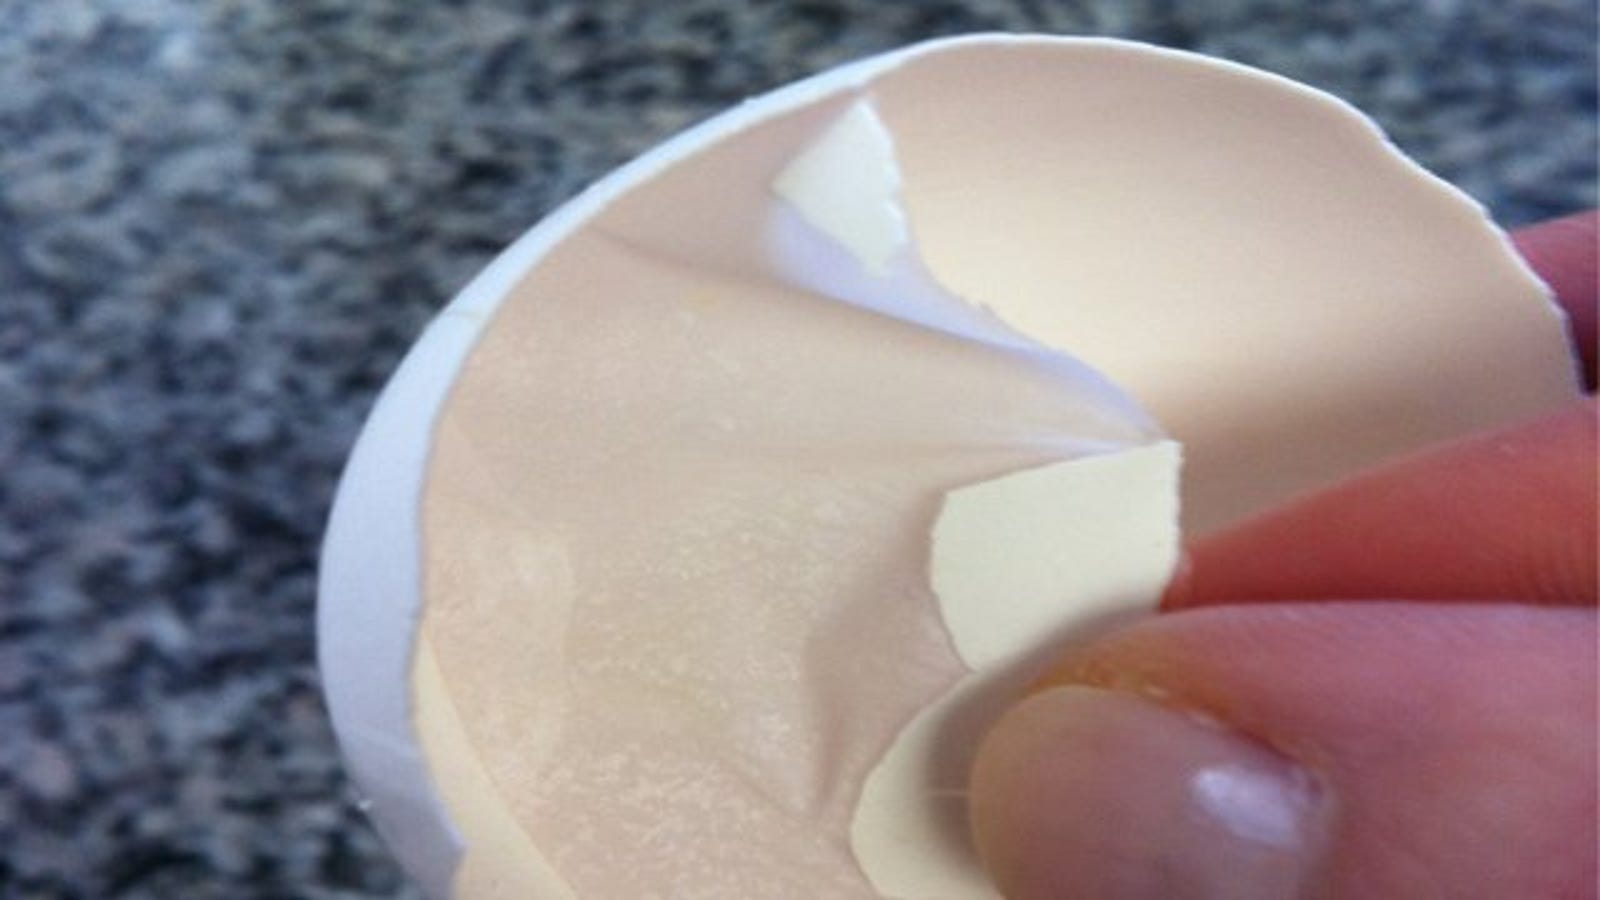 Egg Membranes Can Be Used as Natural Bandages [Update: Do Not Do This]